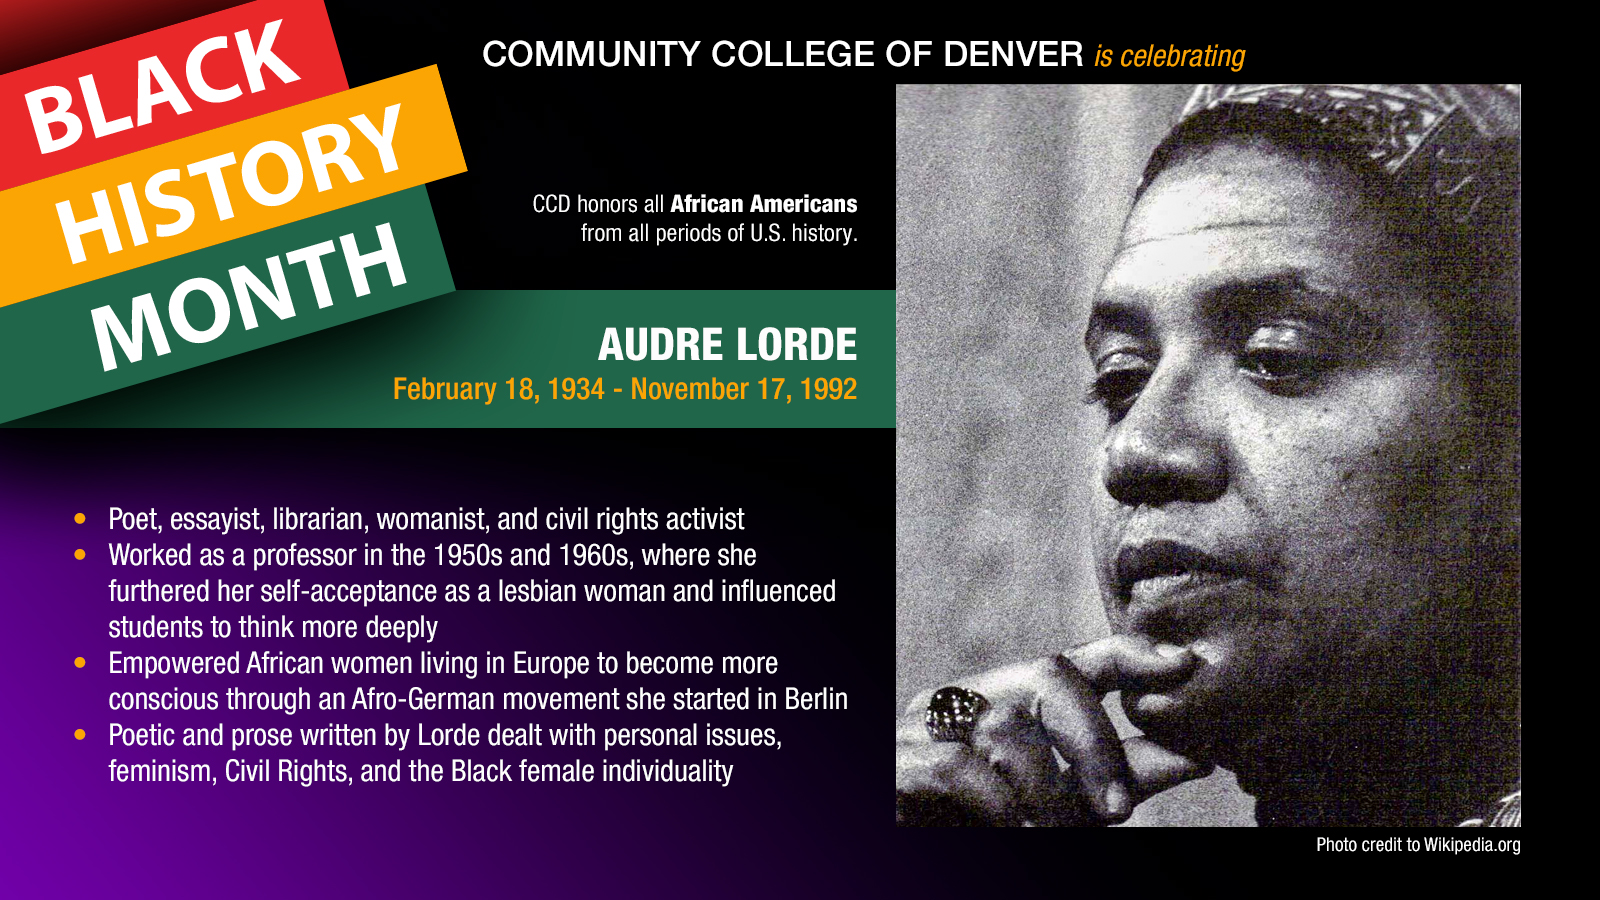 Black History Month. Audre Lorde facts.